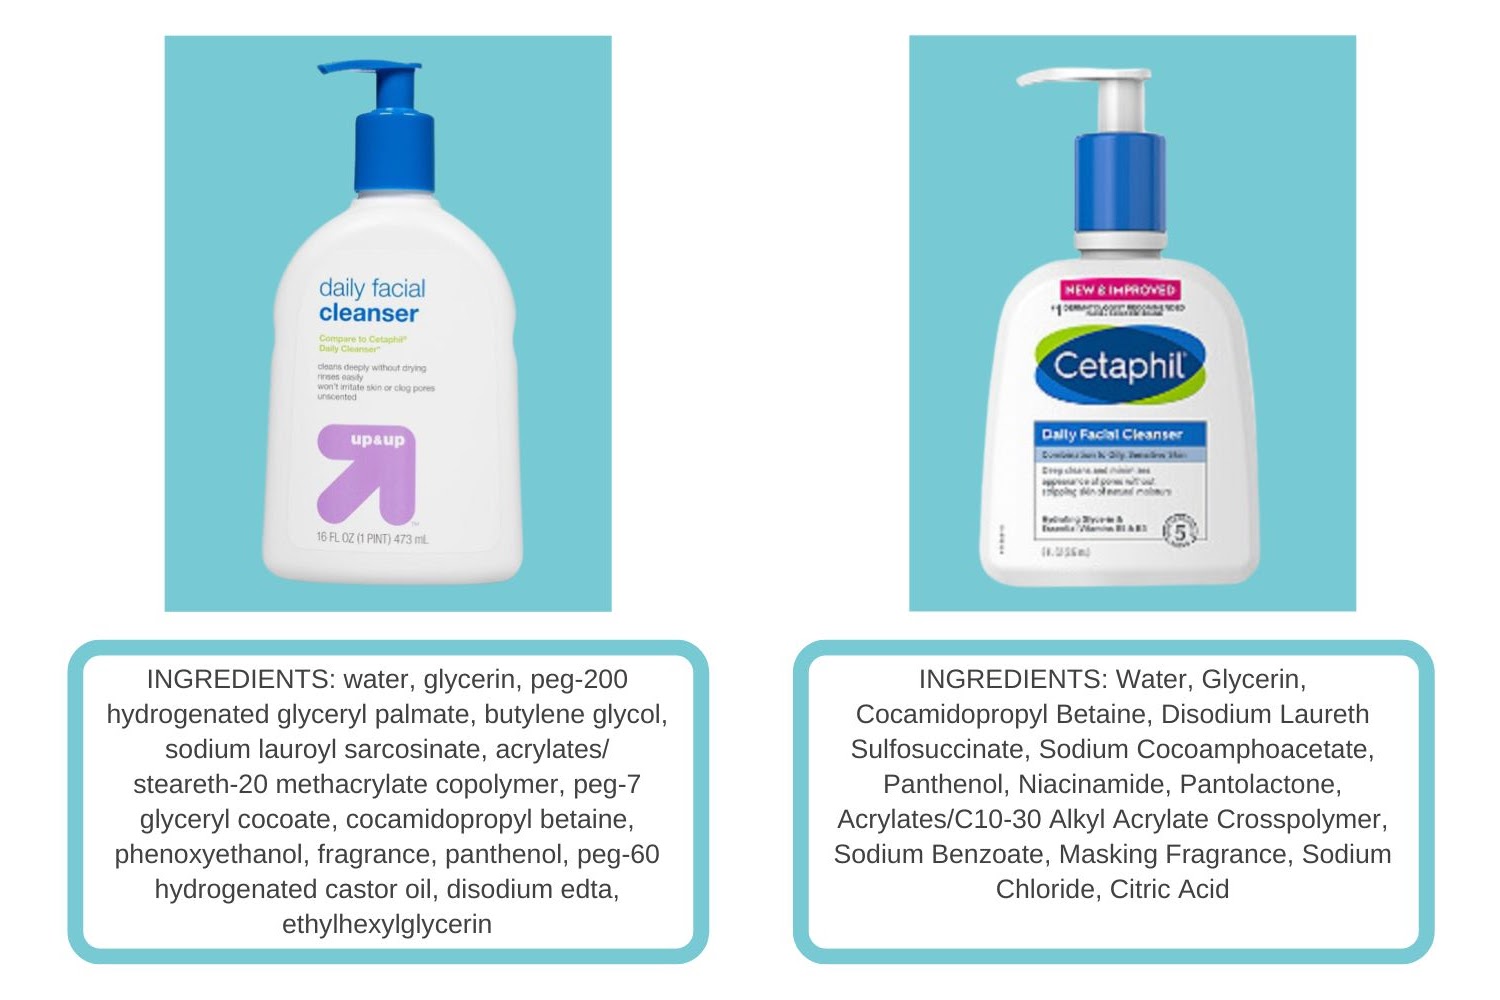 daily facial cleanser ingredient comparison.